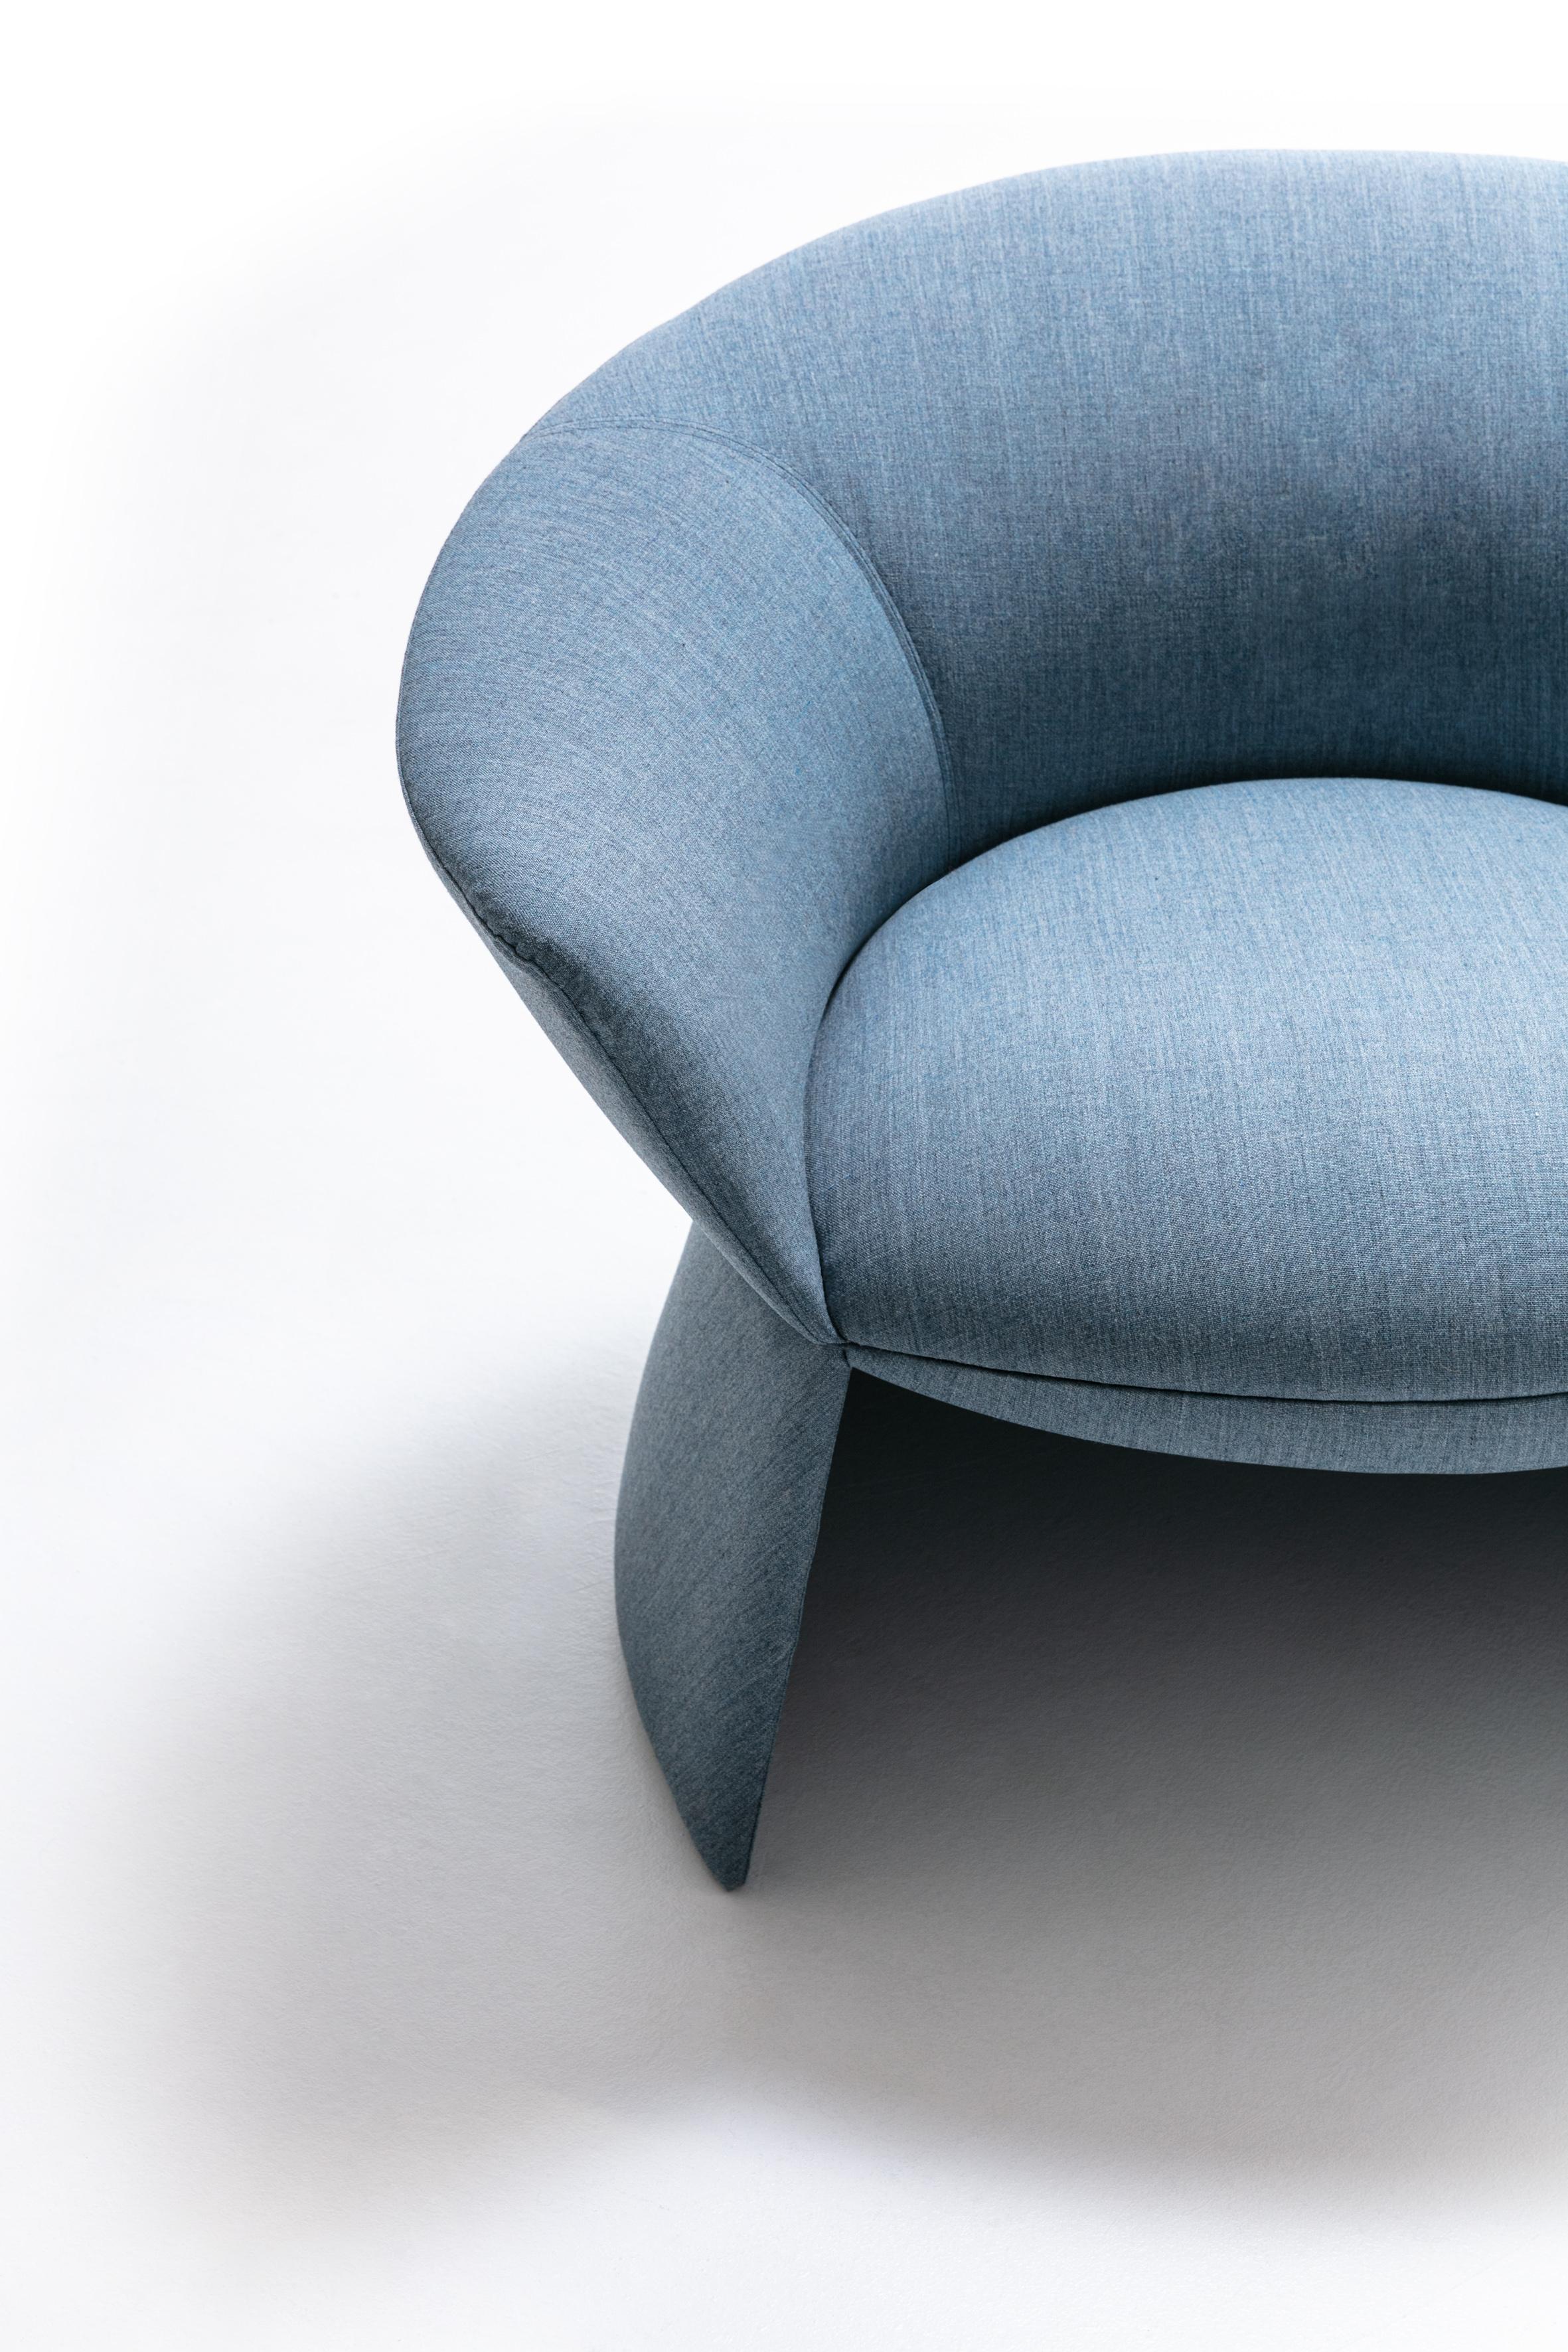 Thanks to an abundant and generous structure, the Swale armchair evokes relaxed conversation scenarios for residential and contract environments. The comfort of the seating is given by its large and enveloping shapes, expertly reproduced in the seat